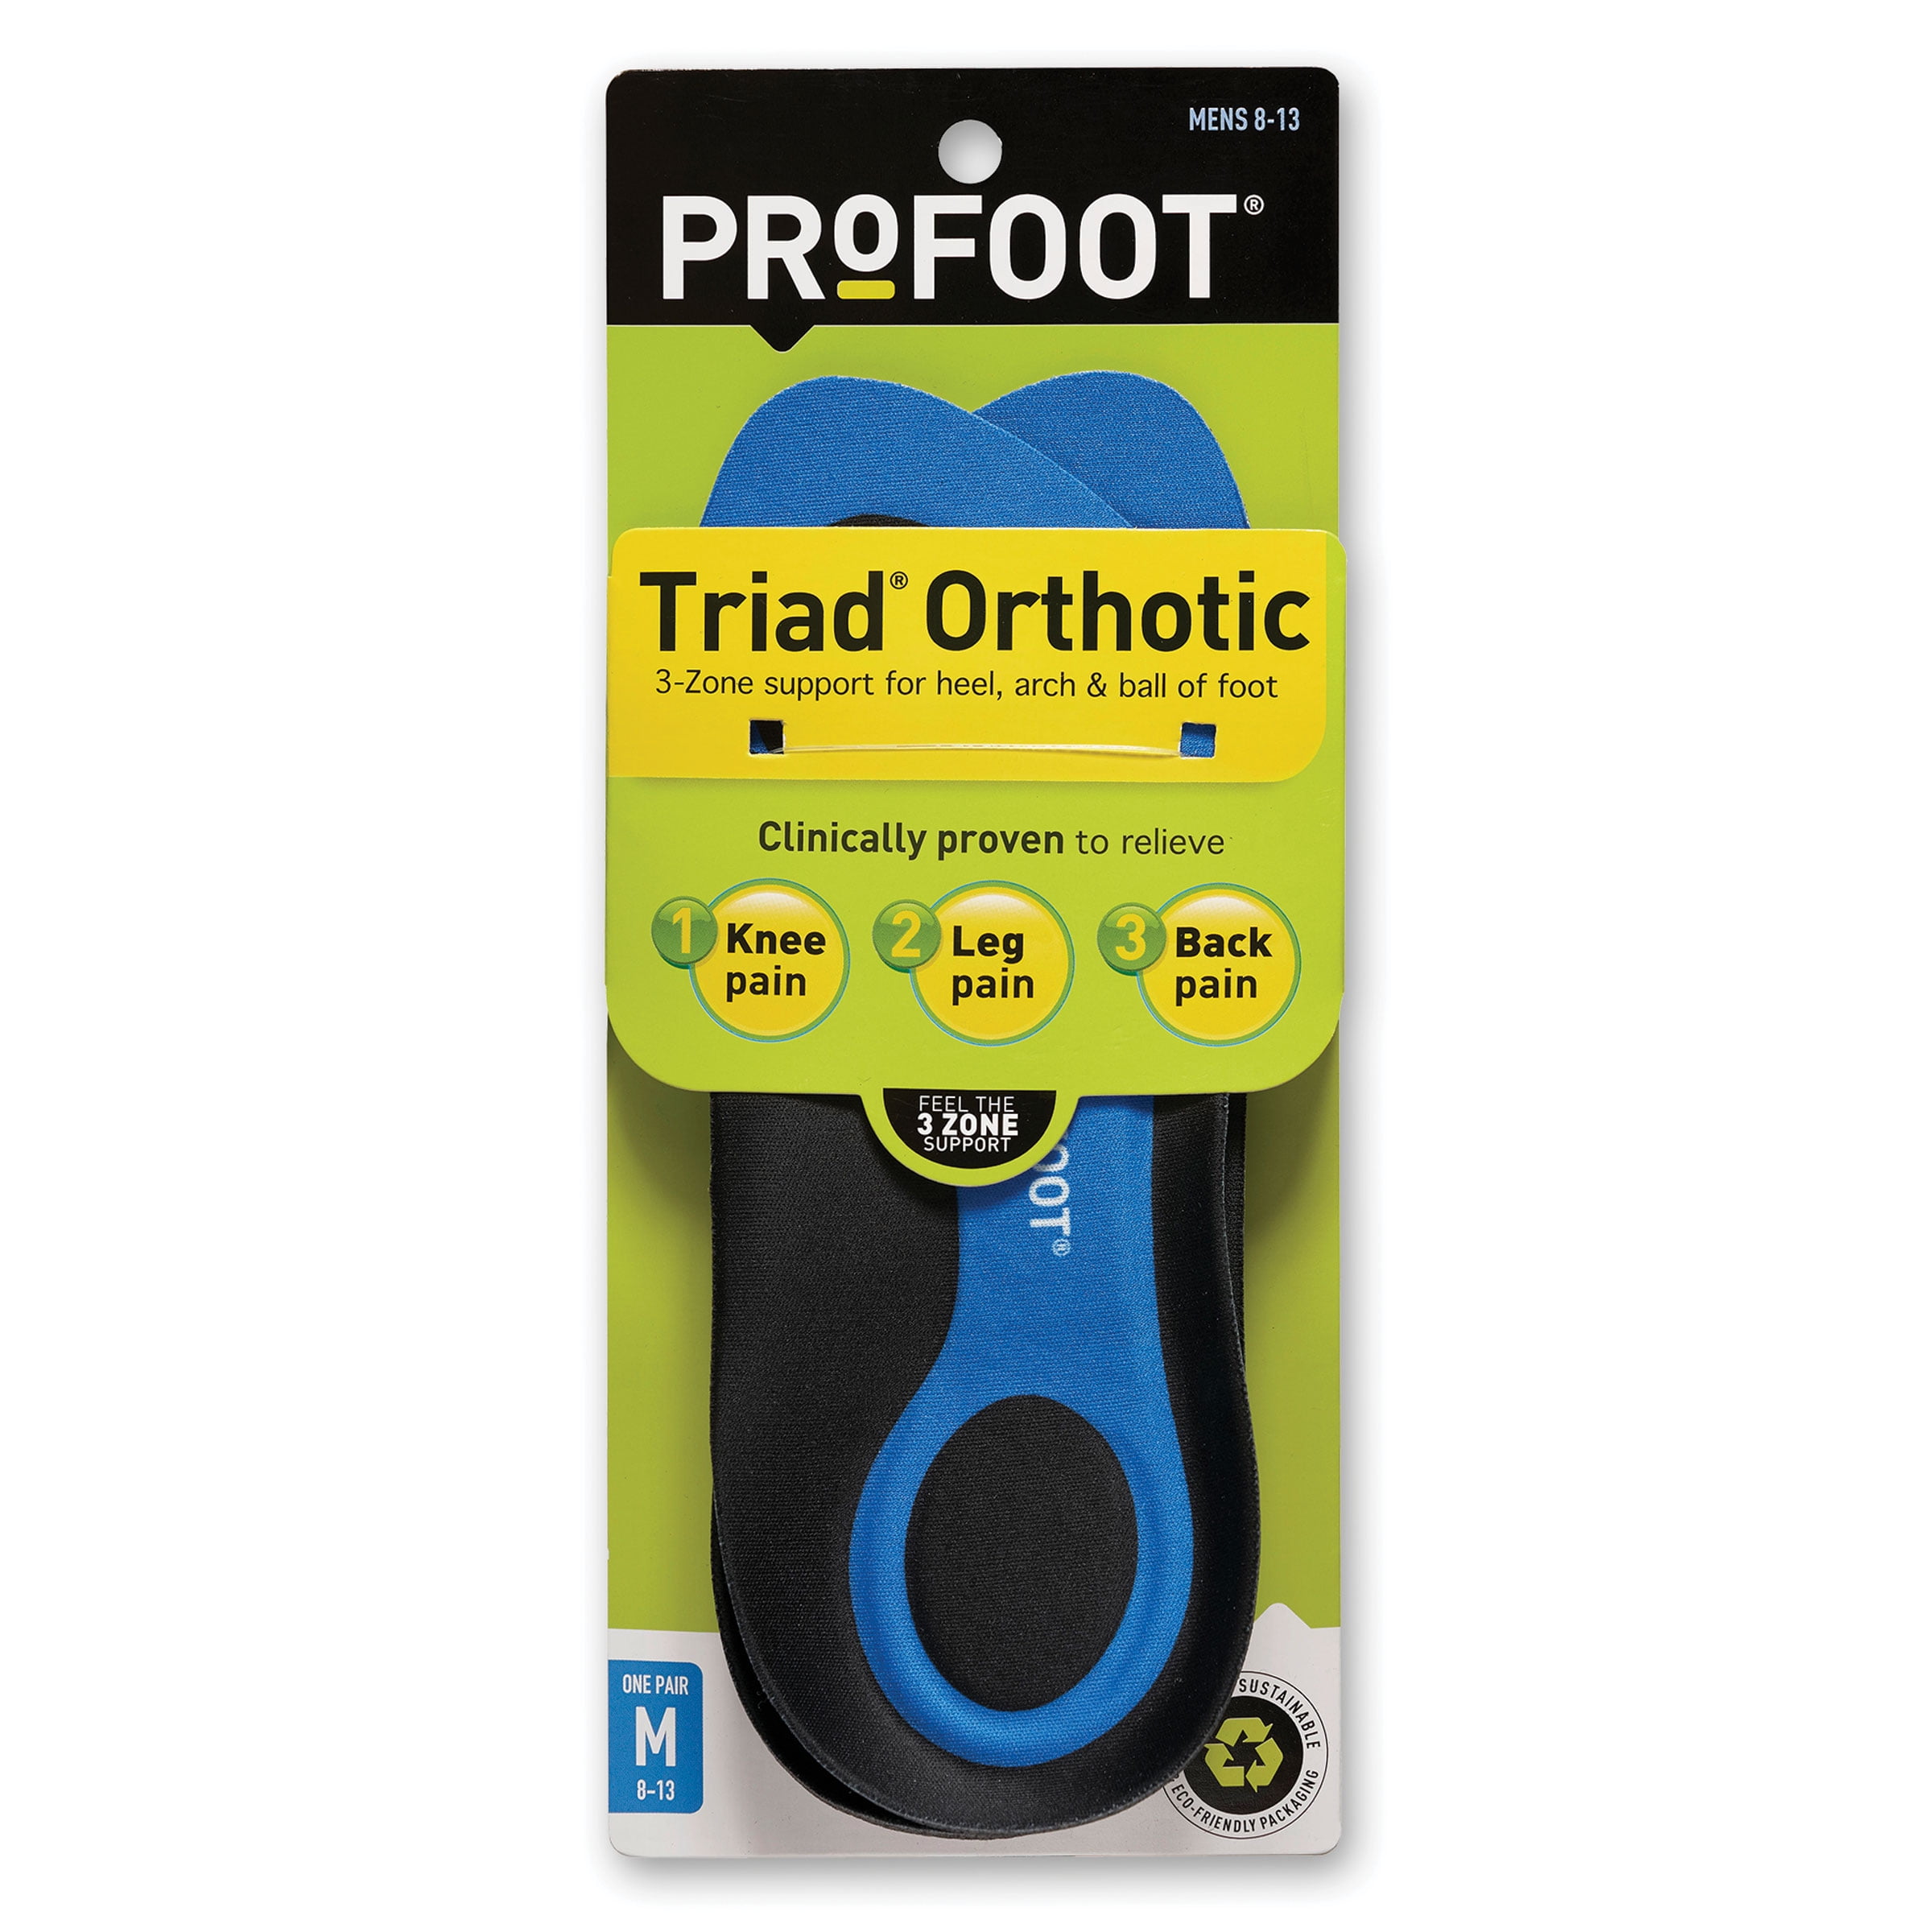 PROFOOT Triad Orthotic Insoles  for Knee, Leg & Back Pain, Men's 8-13, 1 Pair